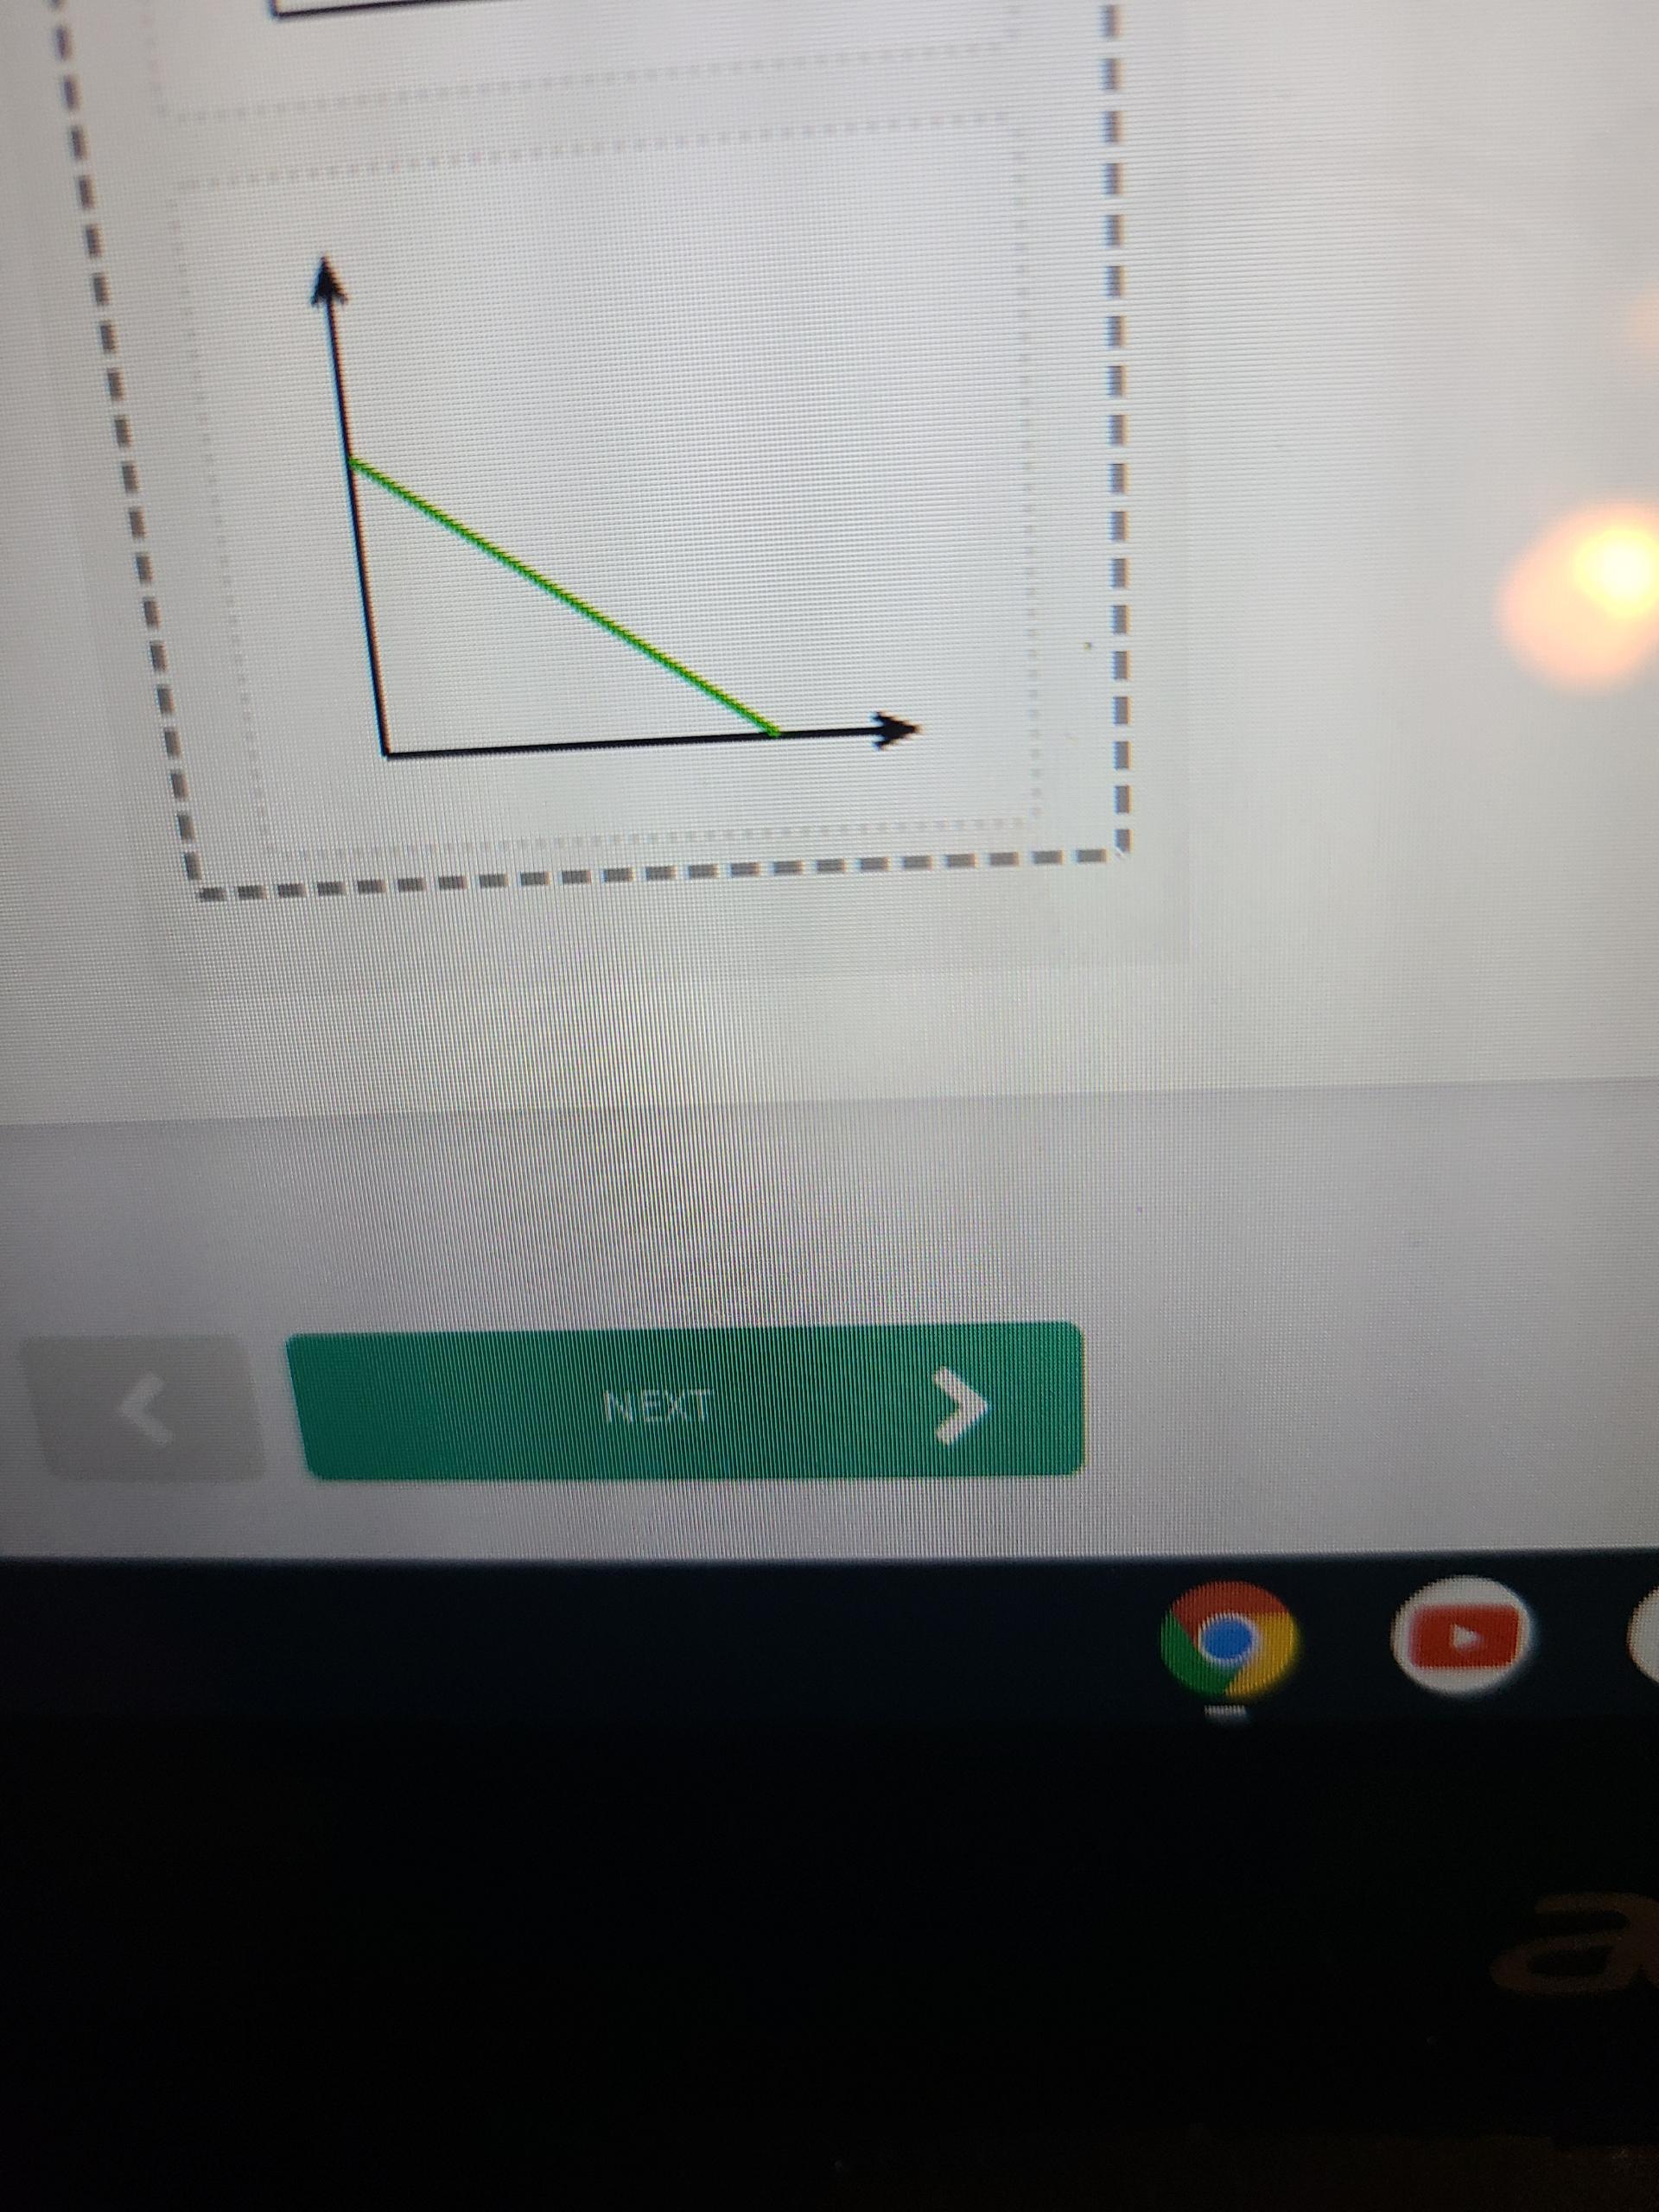 Math Help With Problems Is This Line Linear Or Nonlinear